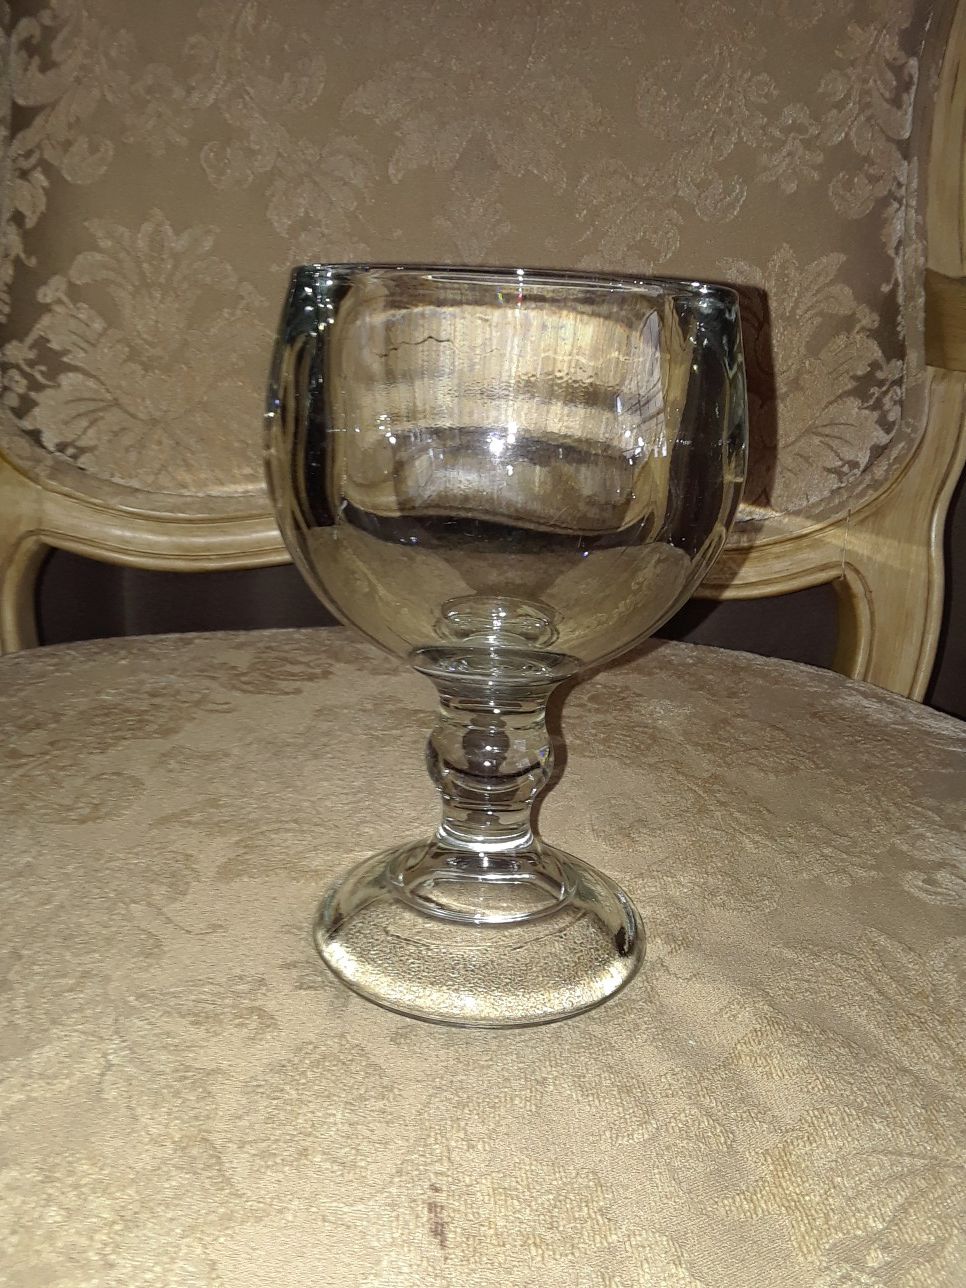 Large heavy glass beer glass candy holder